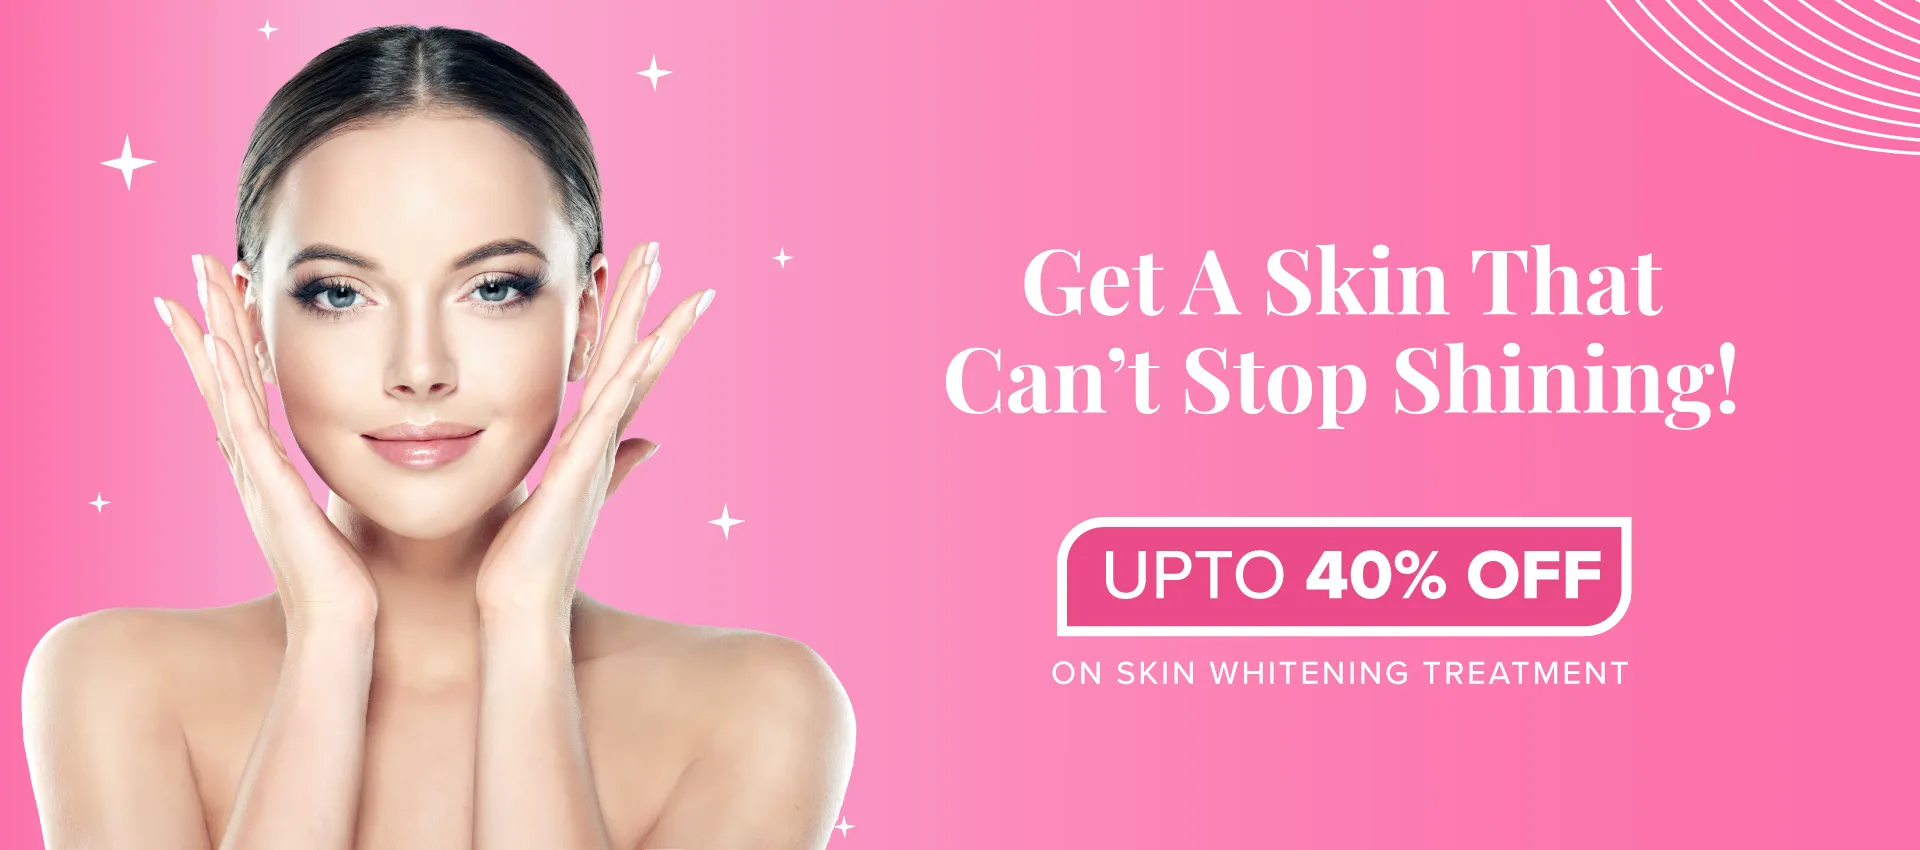 Skin Whitening - The best skin care clinic in India | VCare